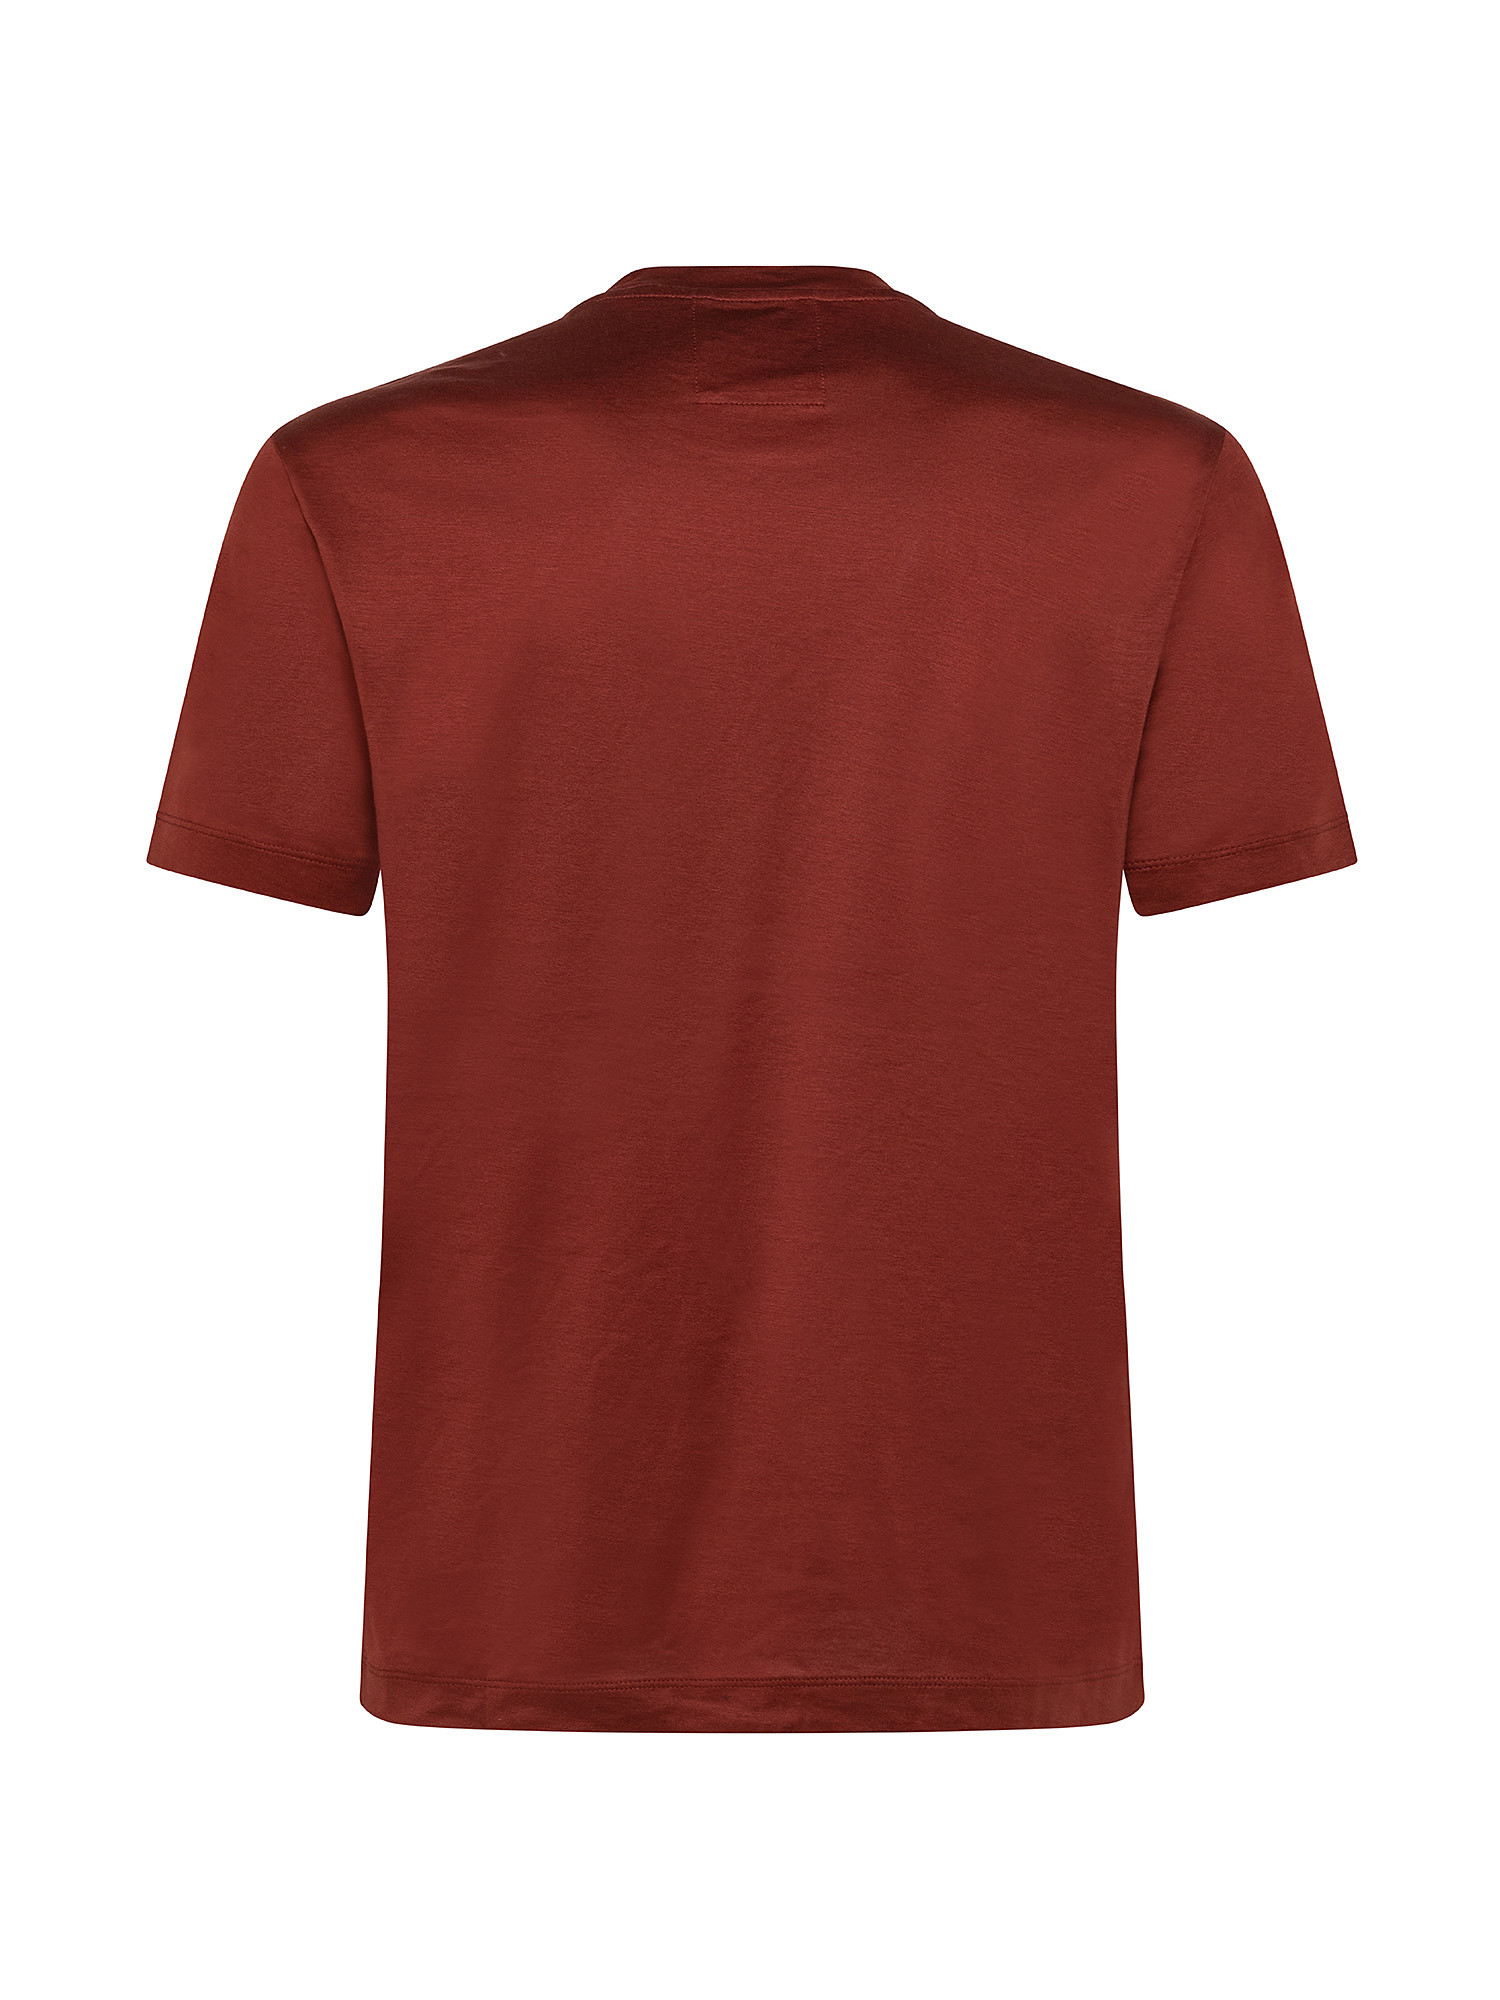 T-shirt logo, Rosso mattone, large image number 1